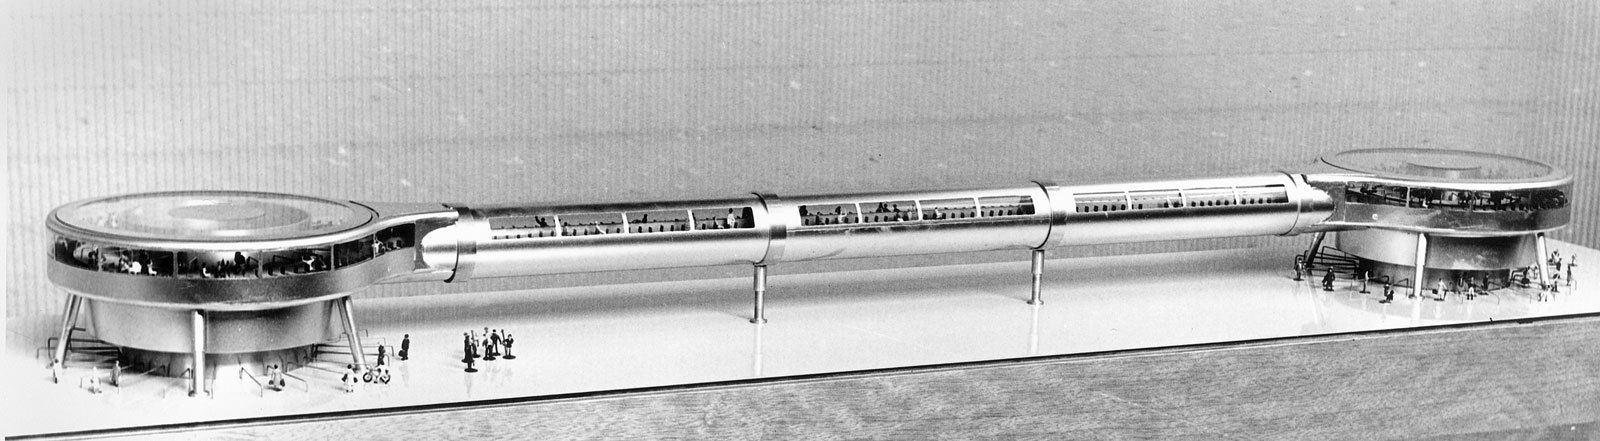 Conceptual model of the moving walkway system with access points. (Image: Kohlmaier/von Sartory &copy; Berlinische Galerie)